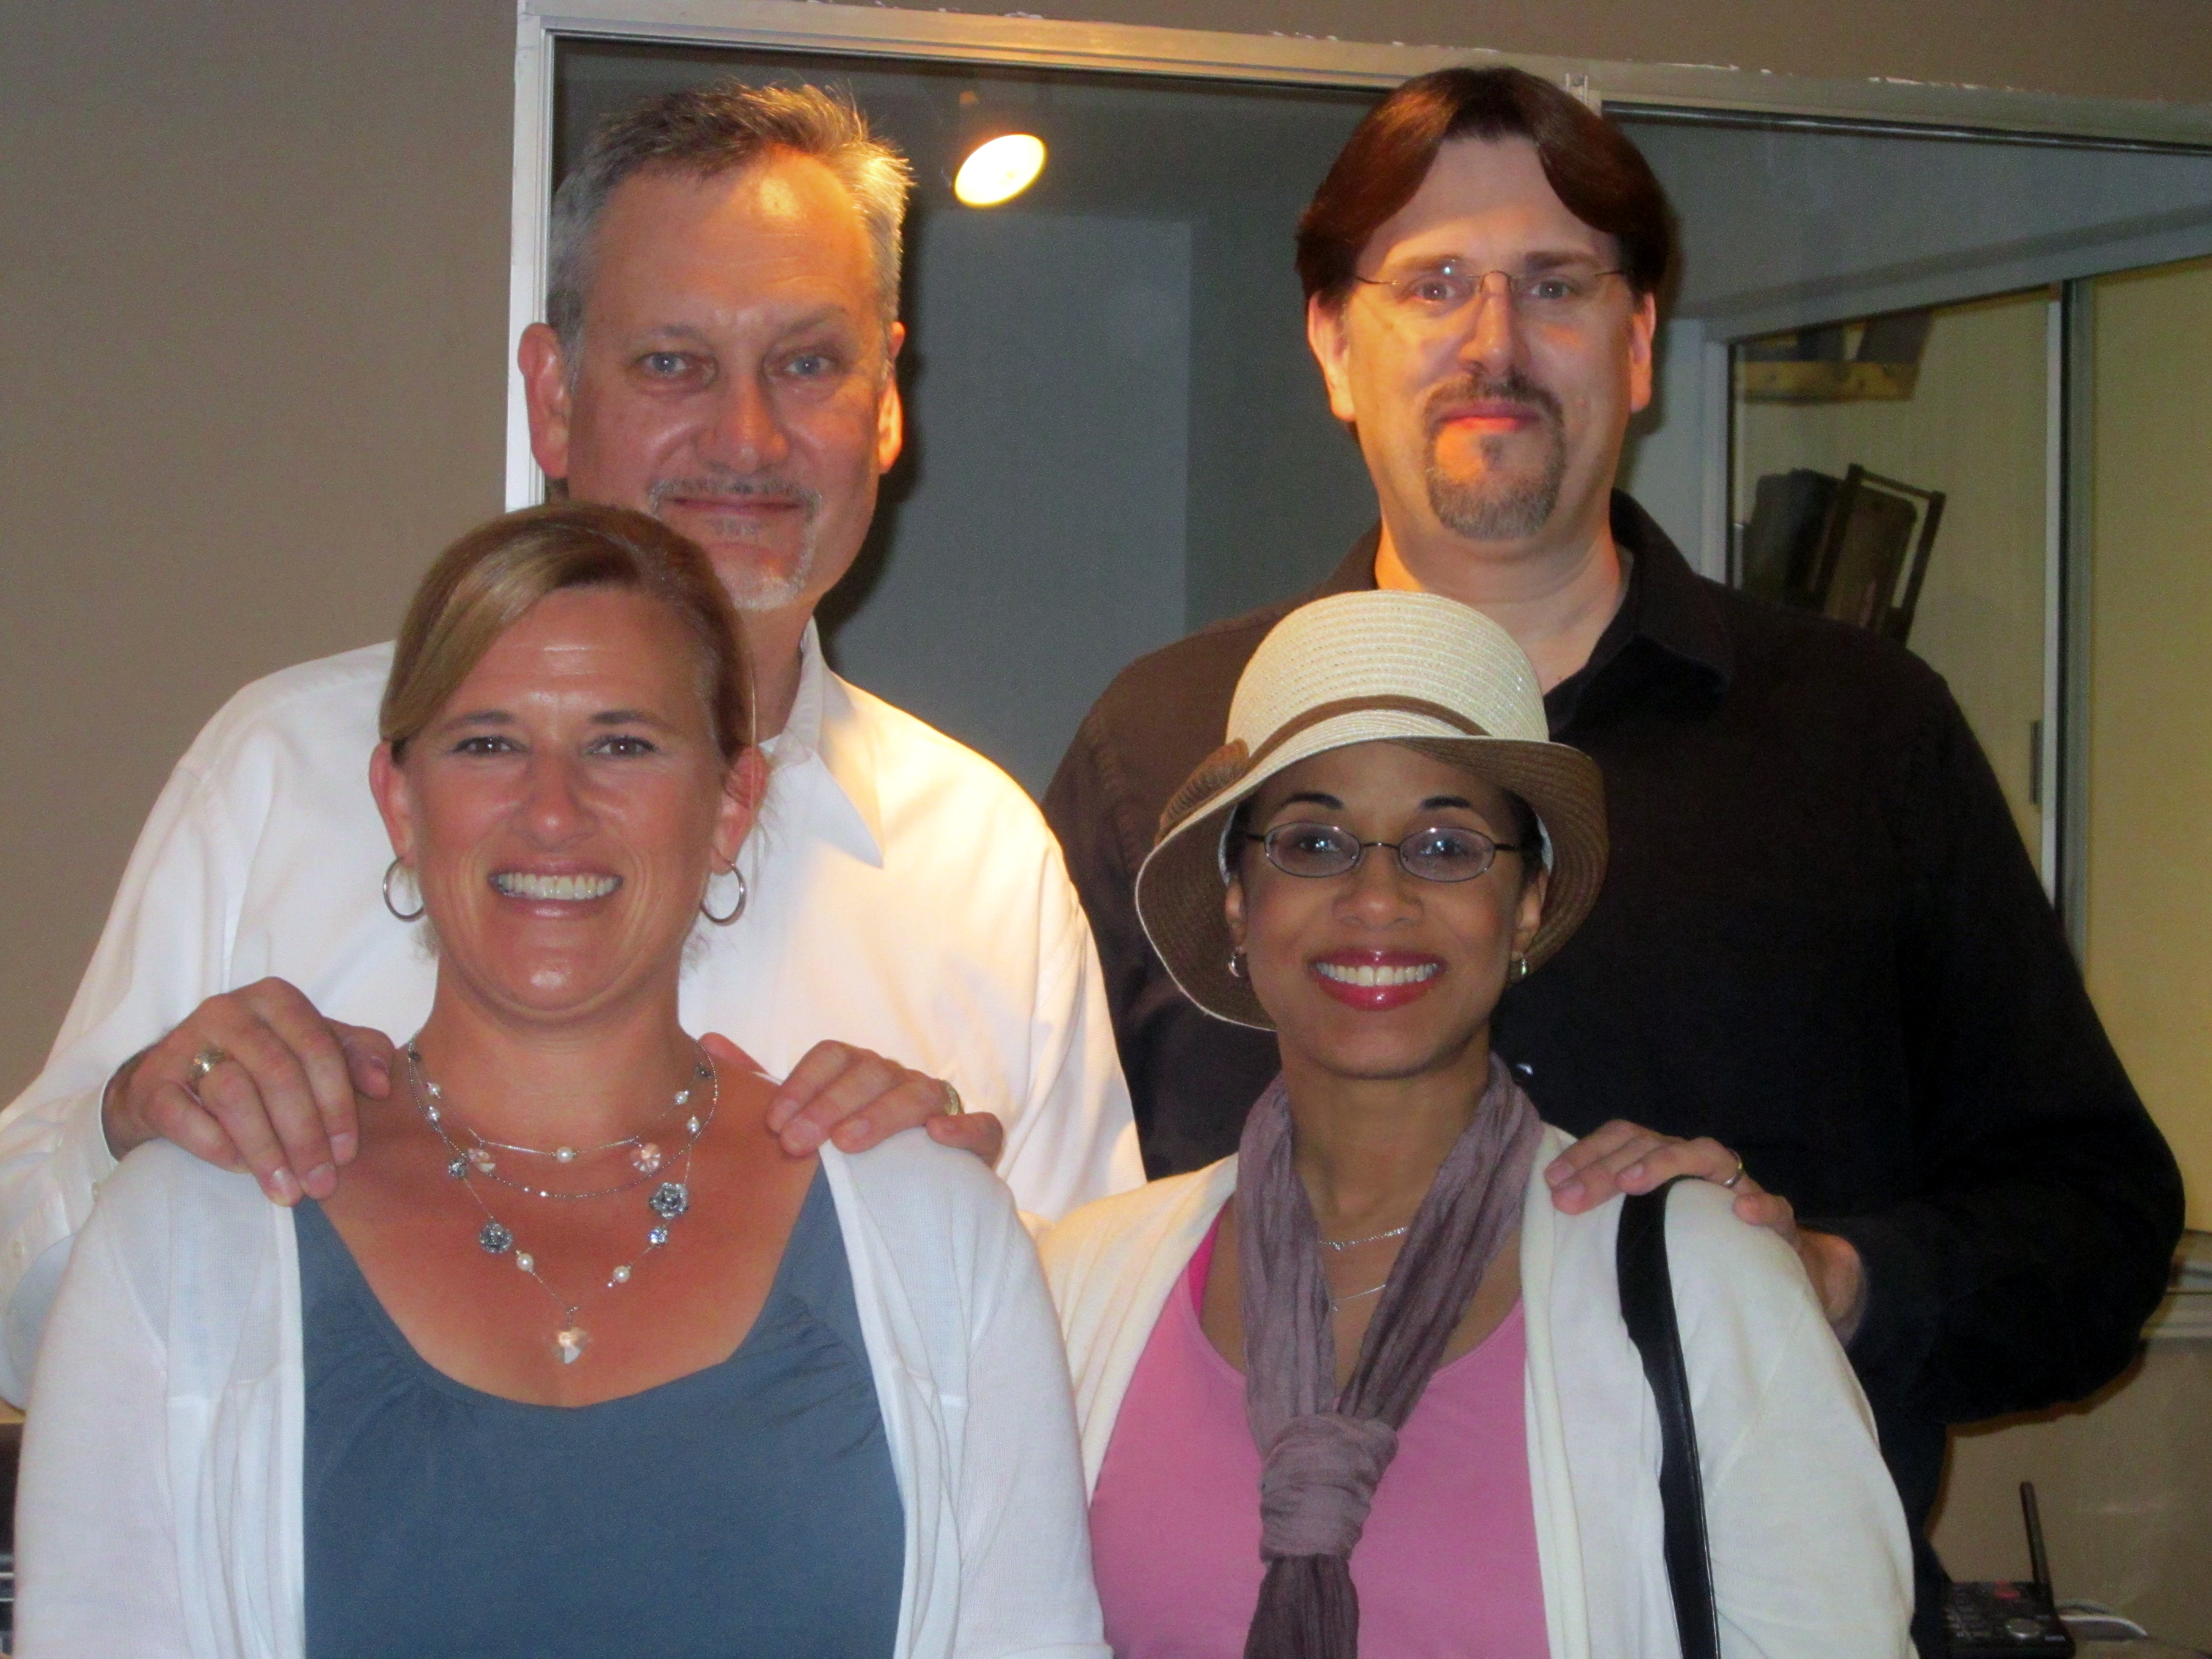 Veronica Loud and her husband C. Andrew Nelson (right) with Jon Peters (left) and his wife at the grand opening of Peters' post-production facility Athena Studios in Emeryville, CA.